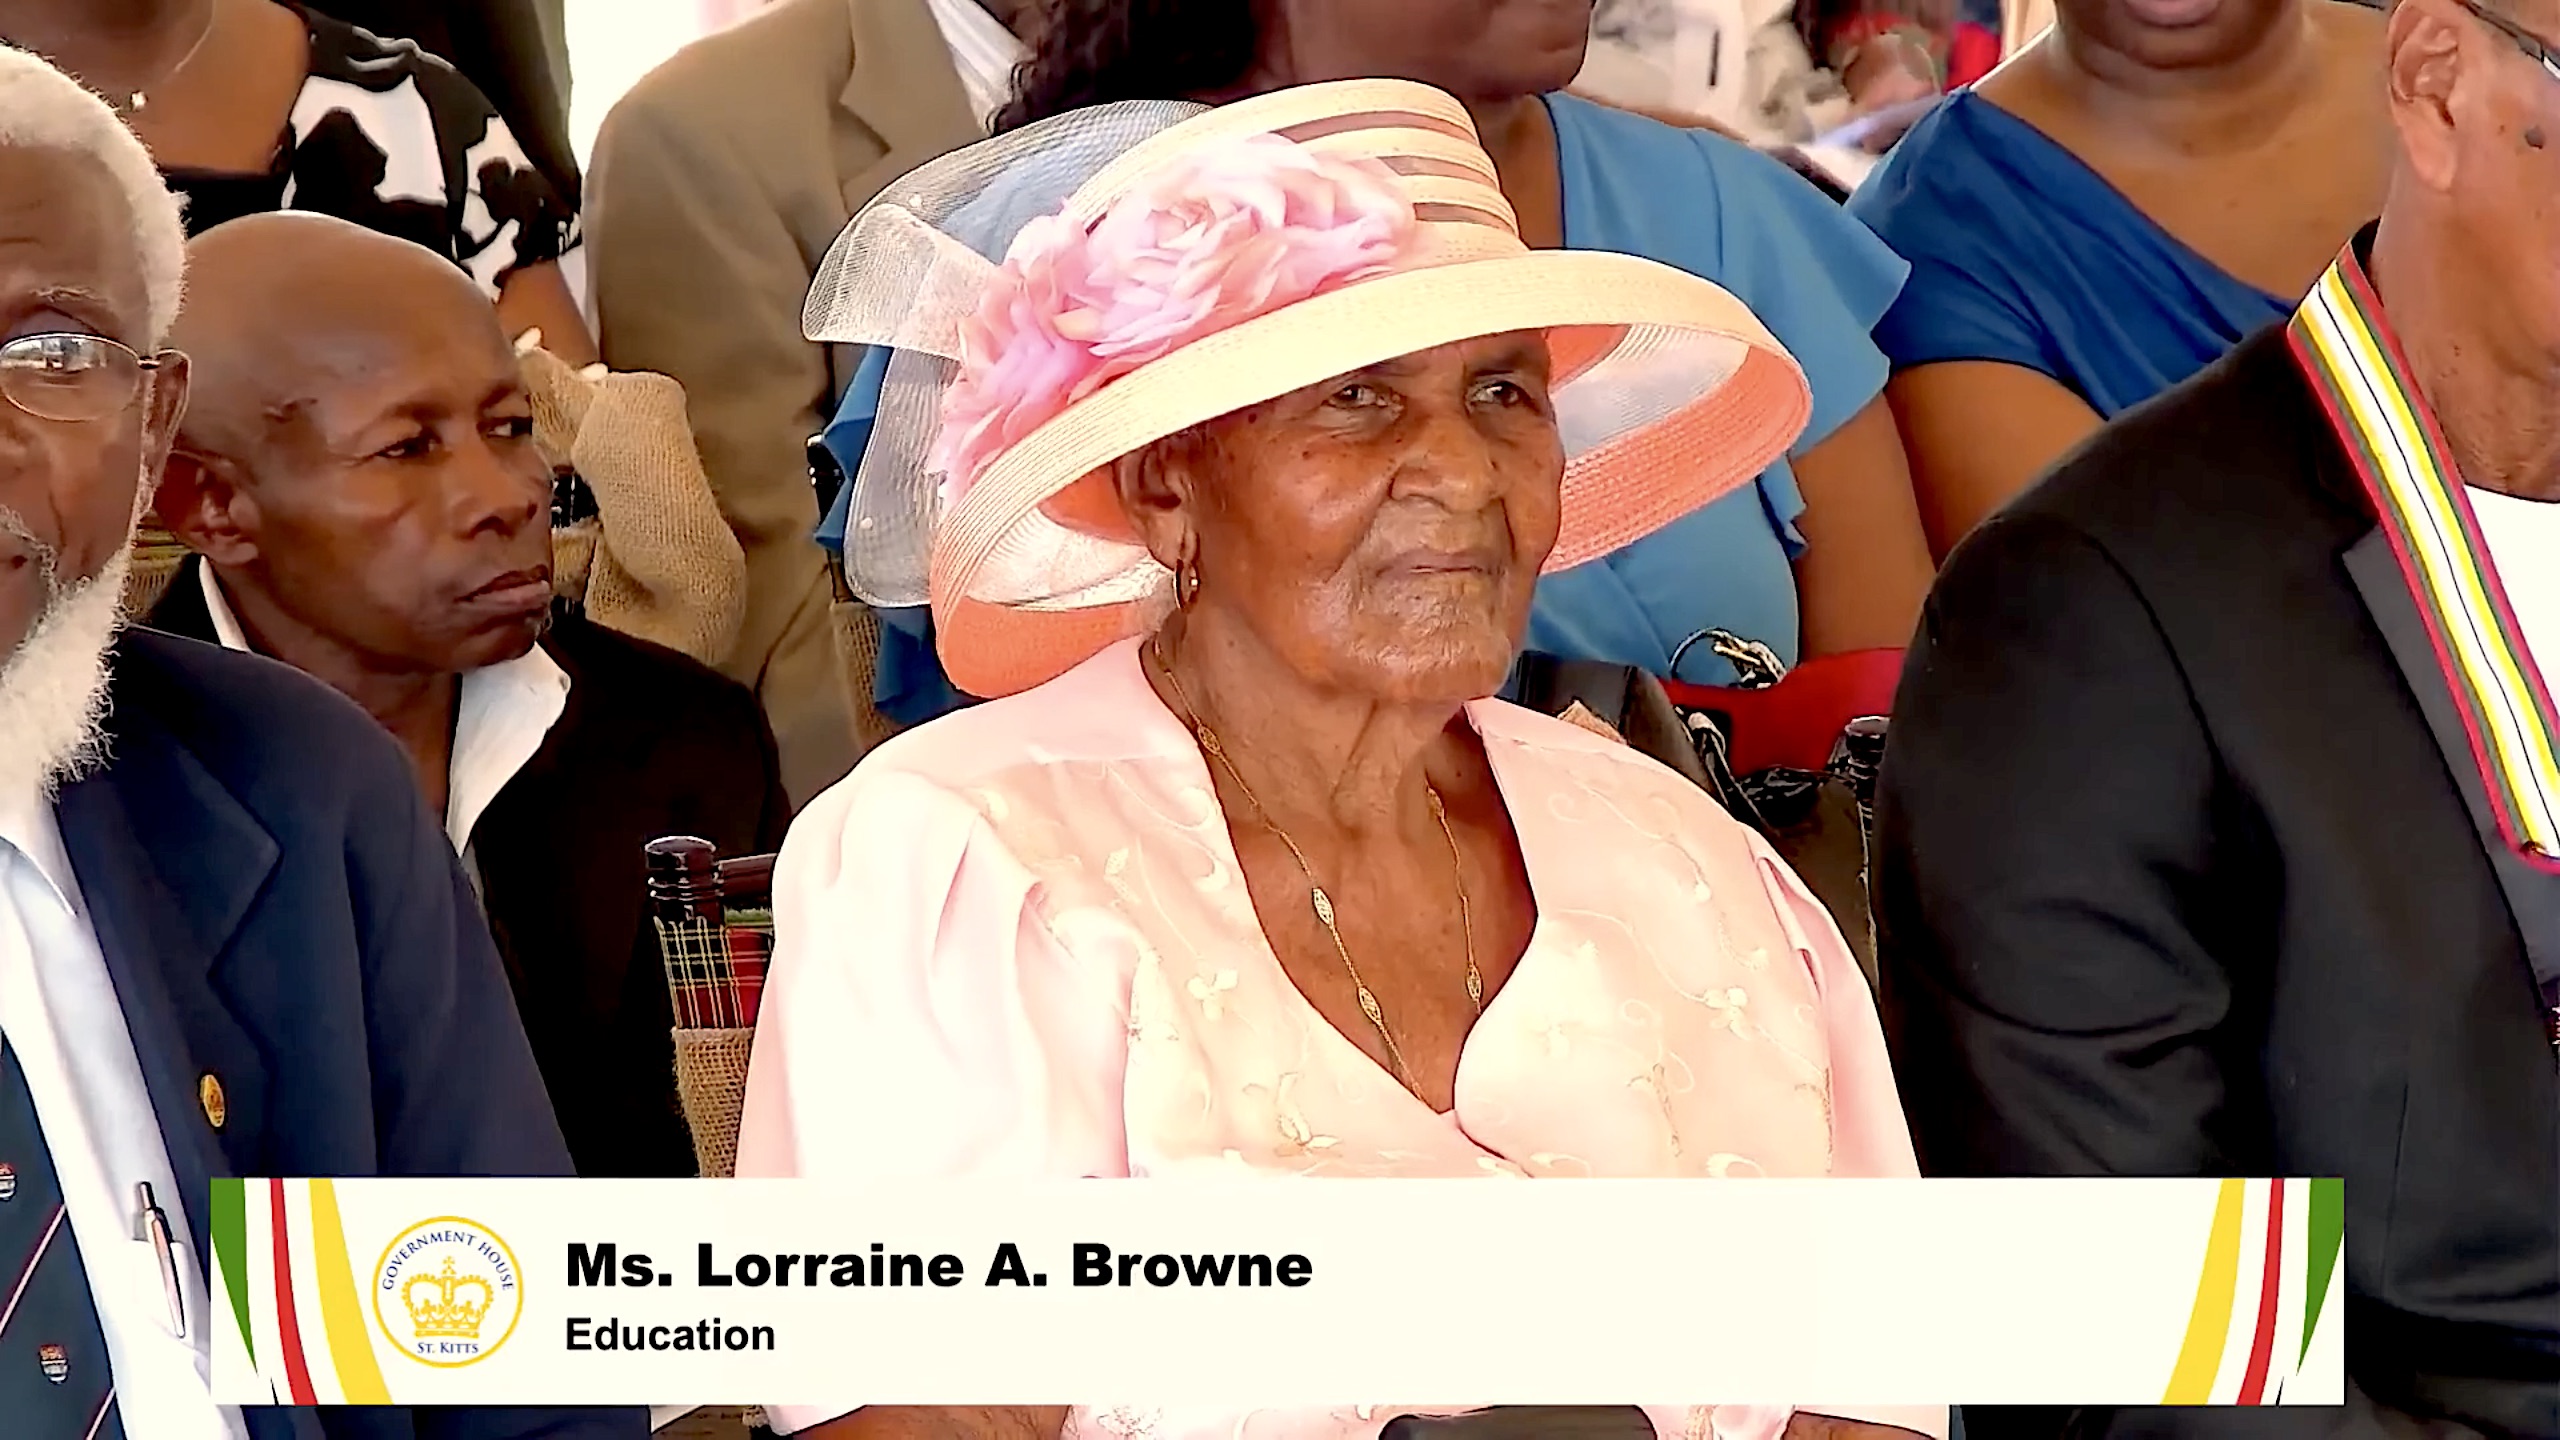 Educator Mrs. Lorraine Agatha Browne affectionately known as Teacher Lorraine or Teacher Lo at the Investiture Ceremony at Government House in Basseterre, St. Kitts on June 20, 2023